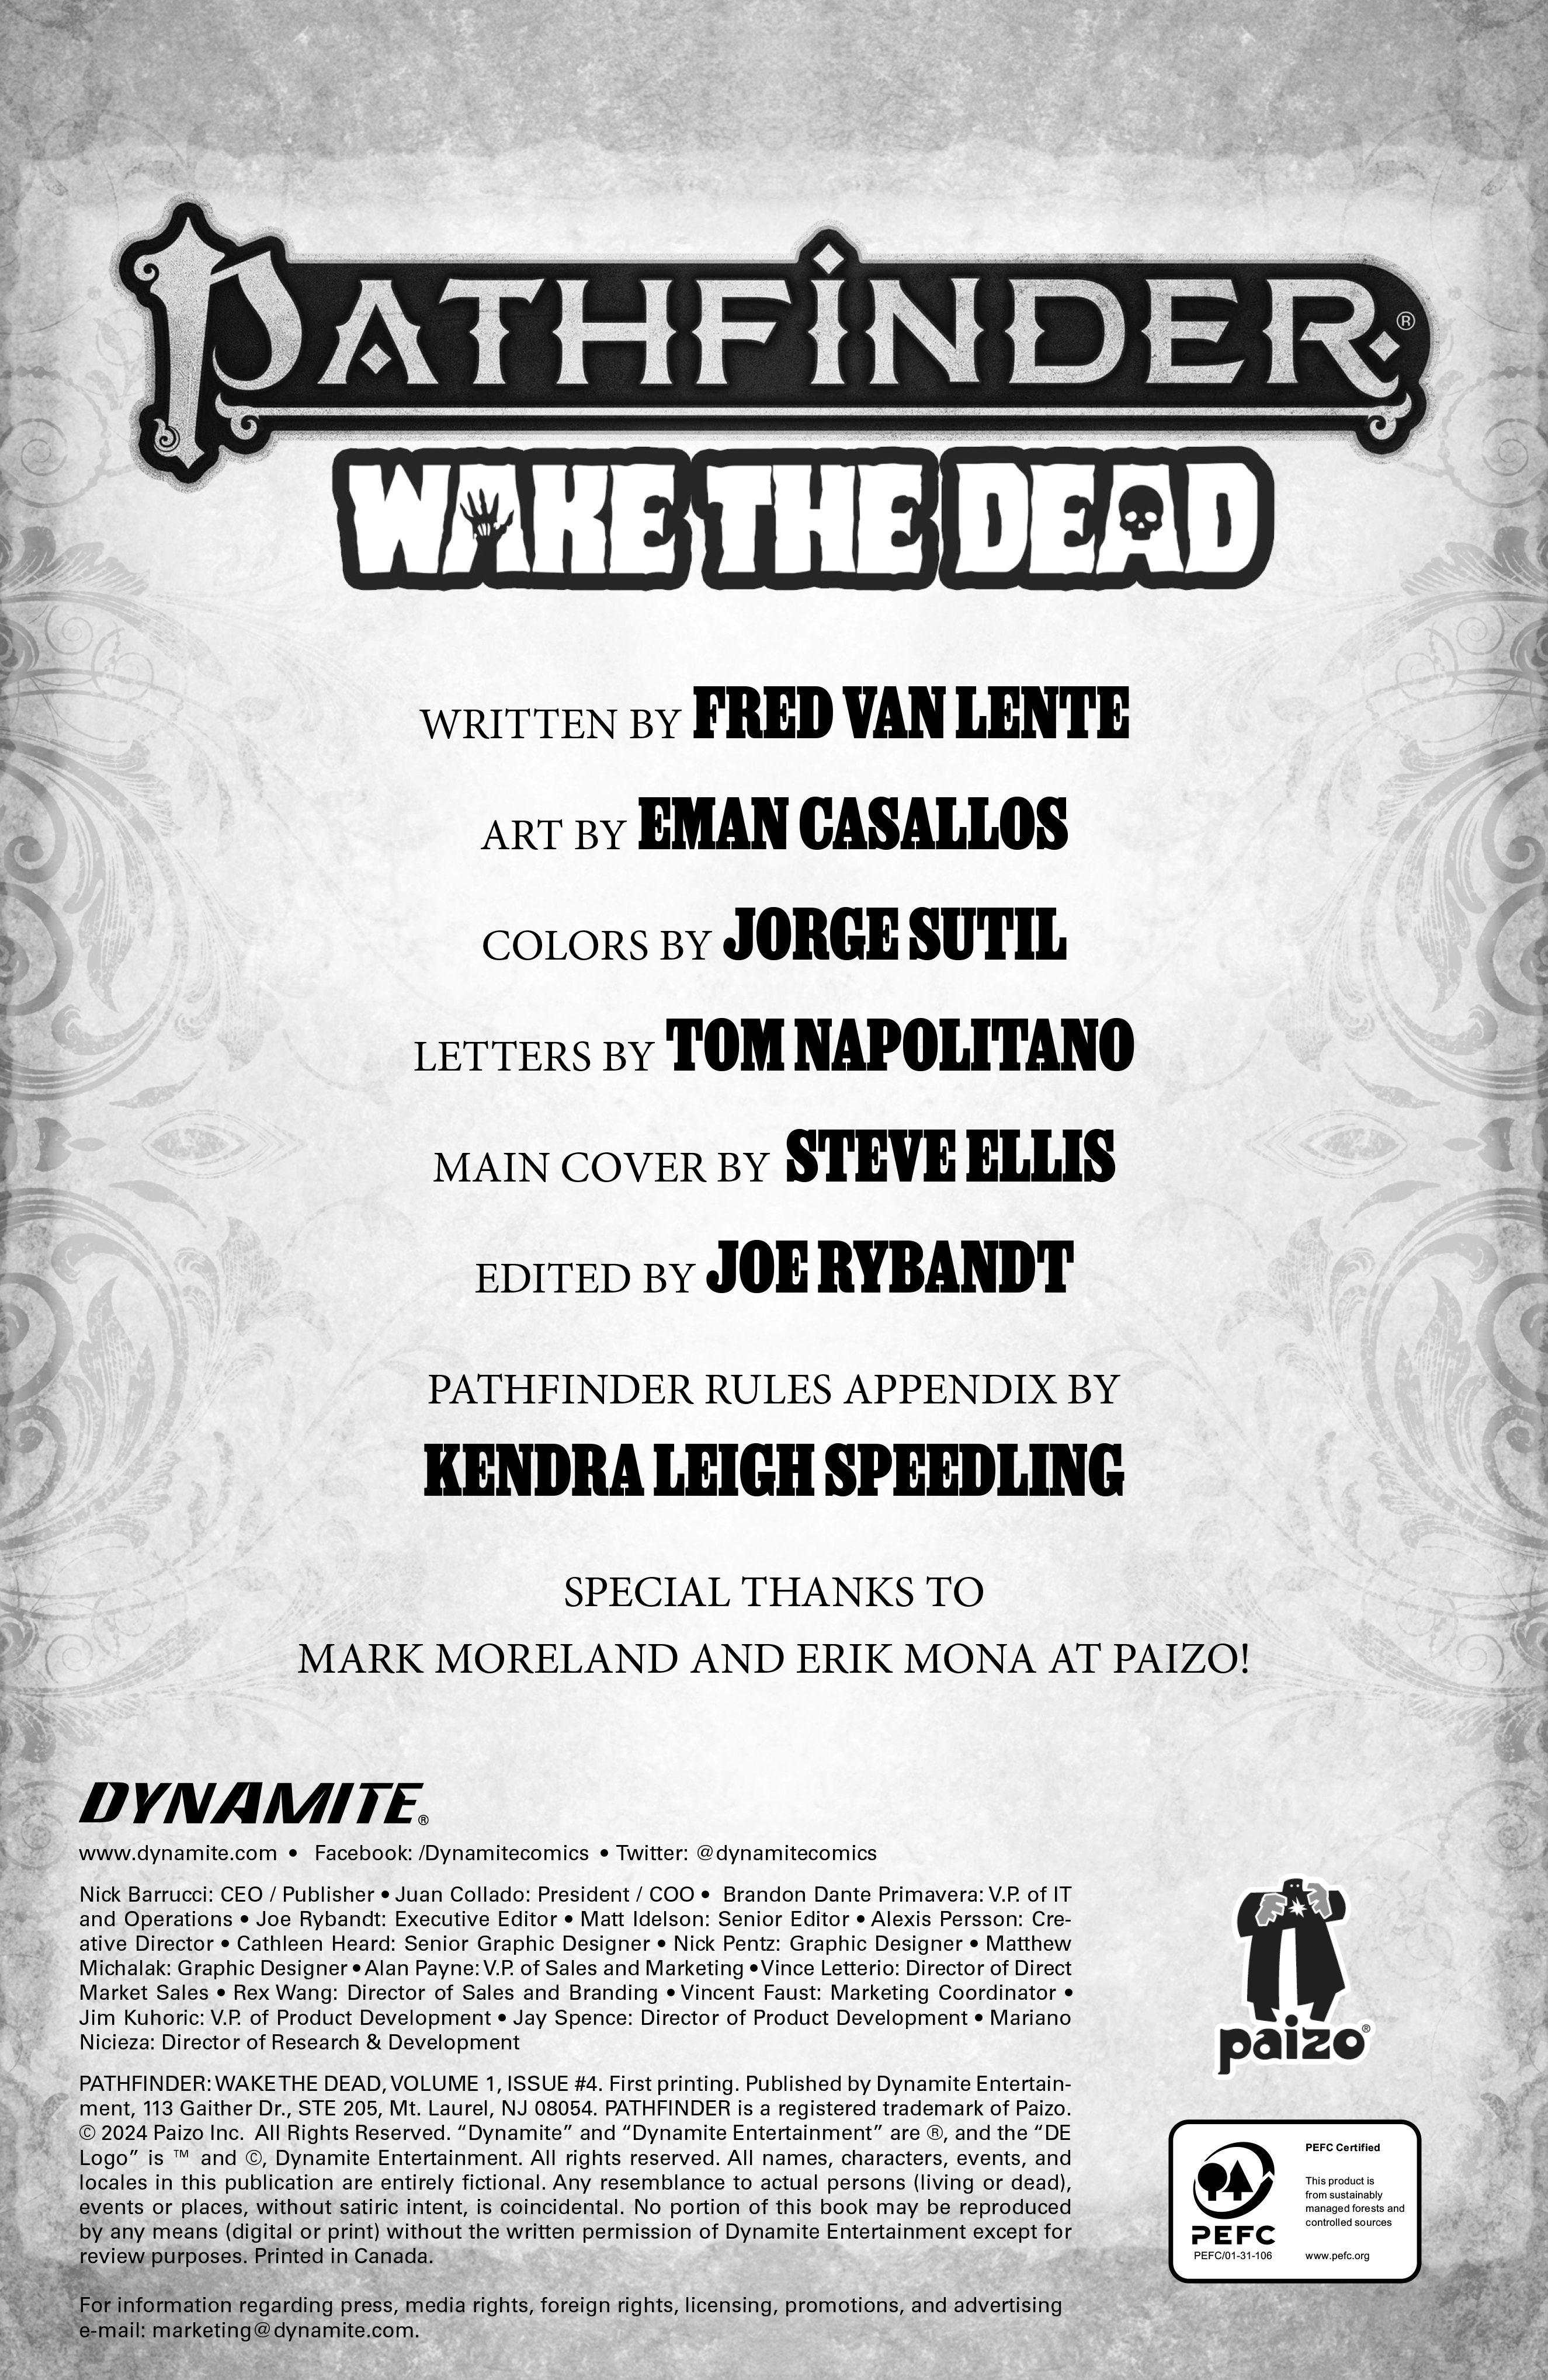 Read online Pathfinder: Wake the Dead comic -  Issue #5 - 4